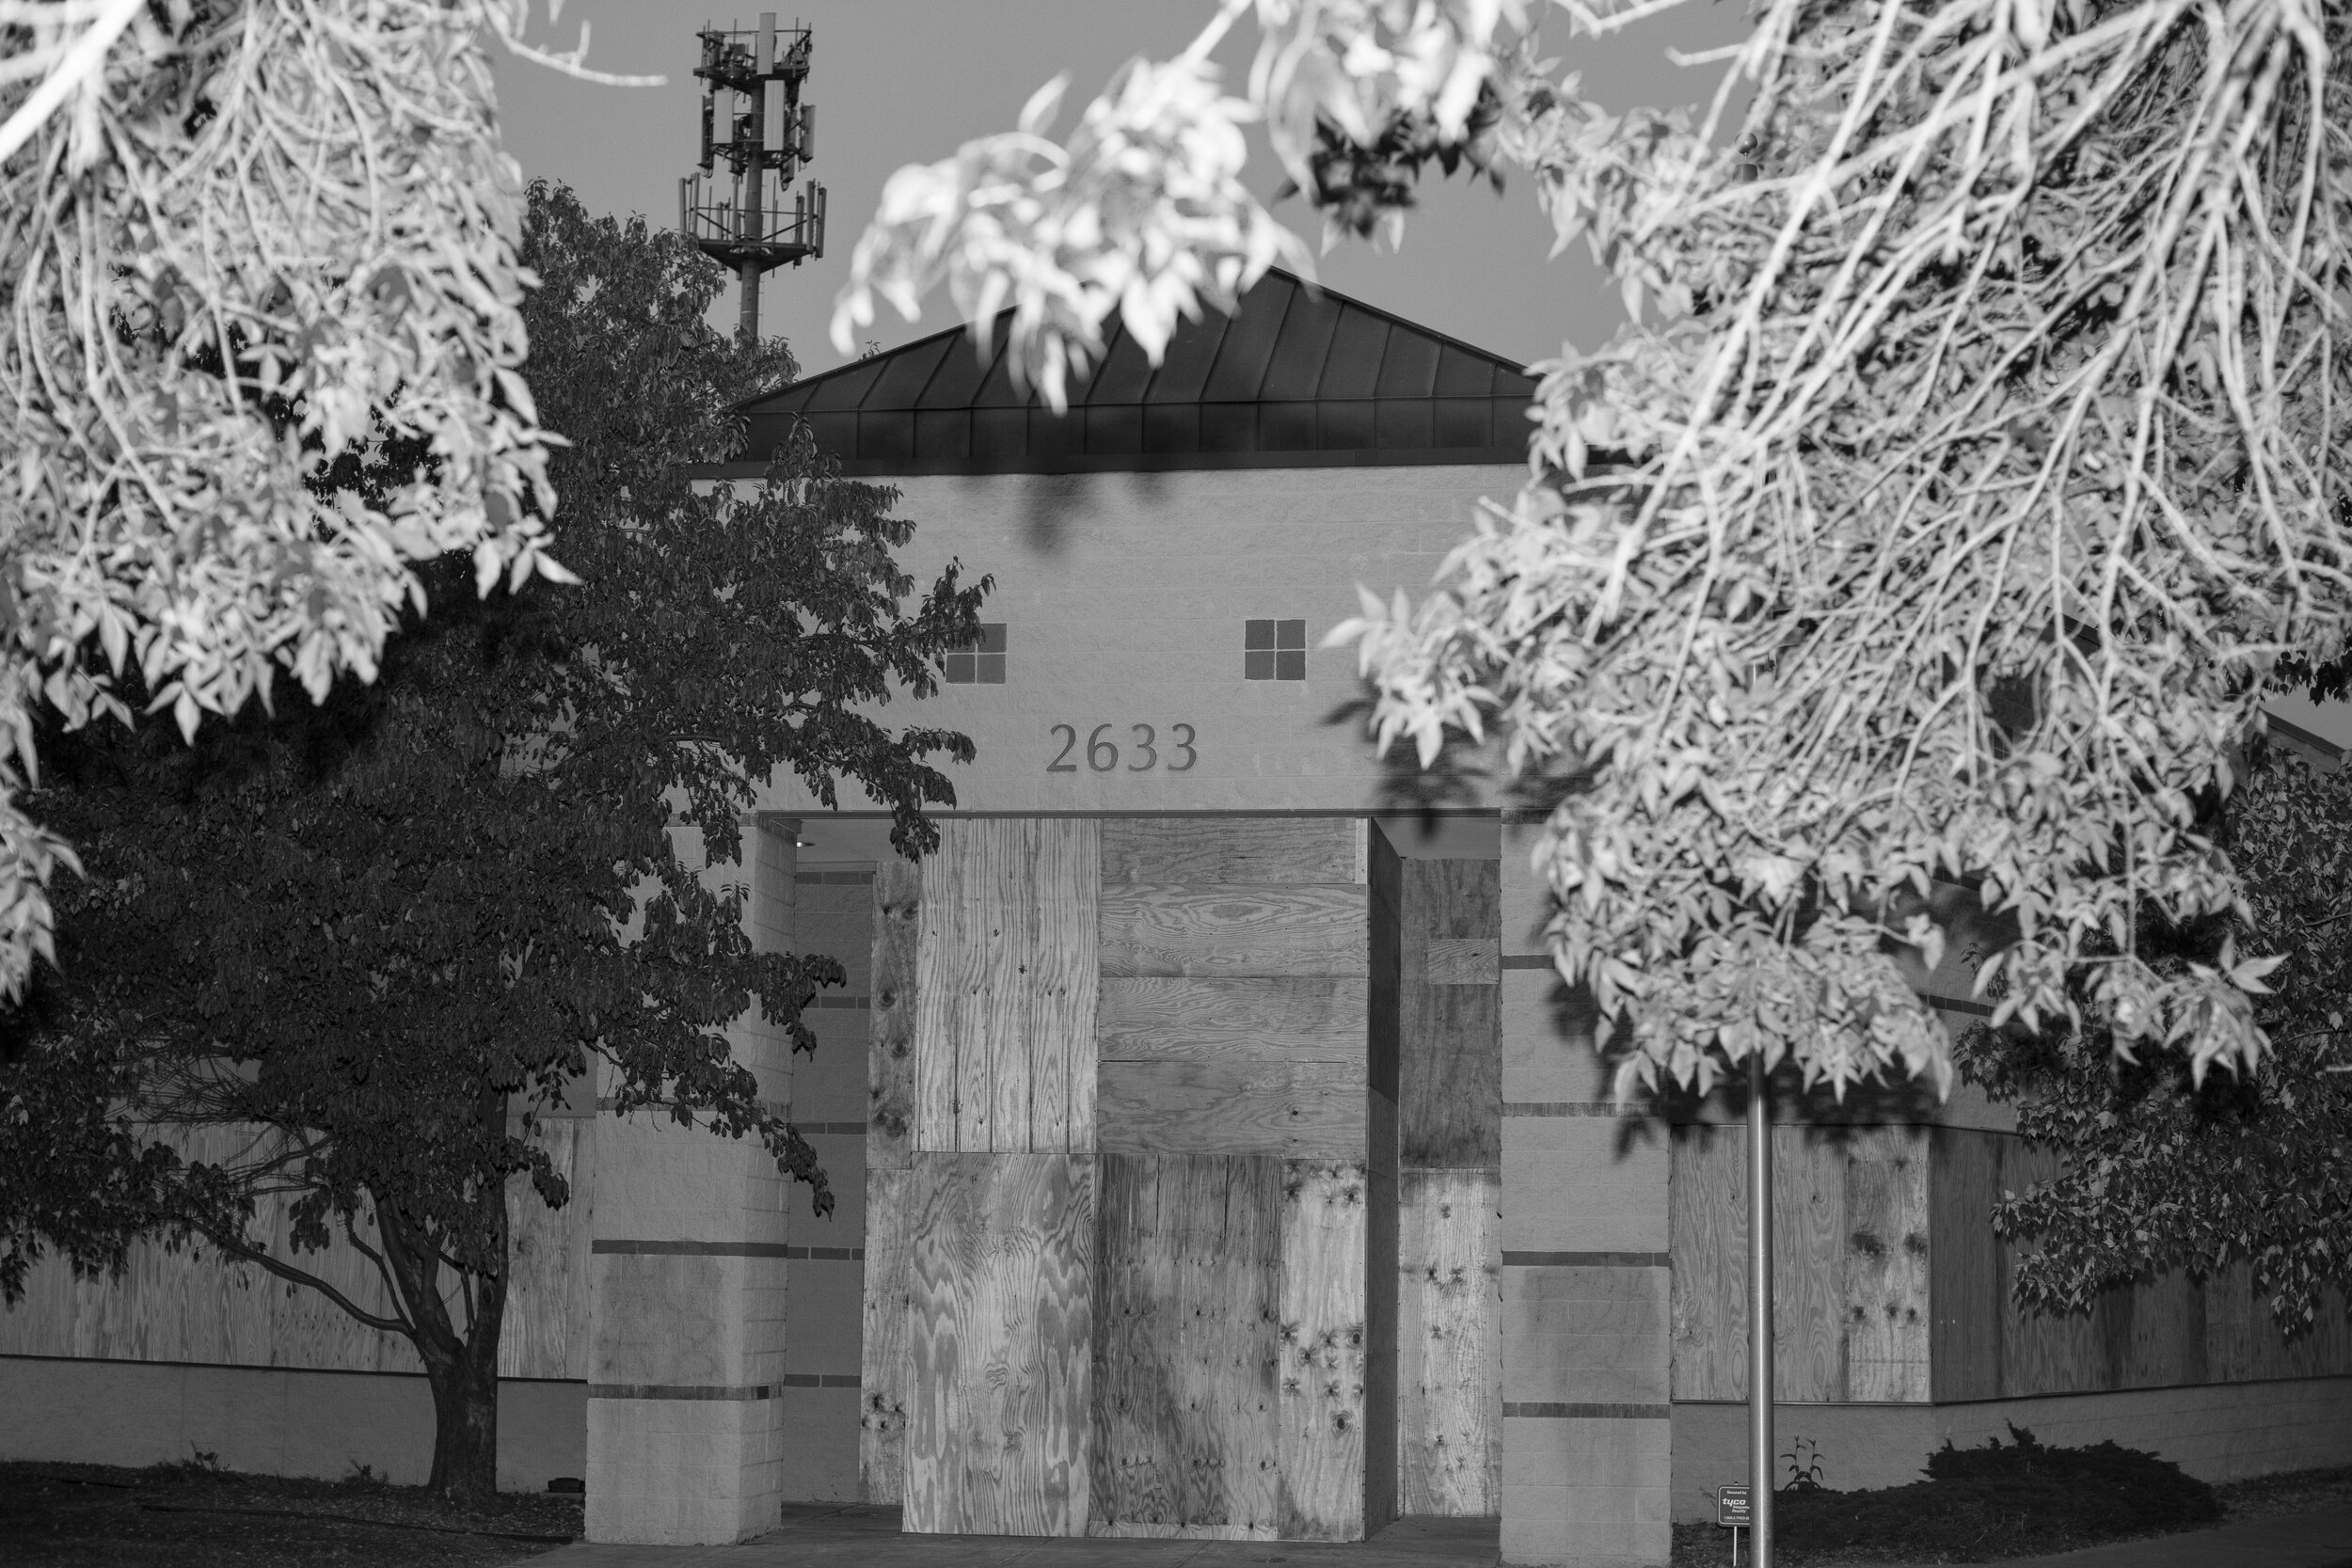  The building proposed to replace the Third Police Precinct remains boarded up and empty on Wednesday, September 16th, 2020 in the Seward neighborhood of south Minneapolis. According to a press release from Seward Police Abolition, neighbors in Minne